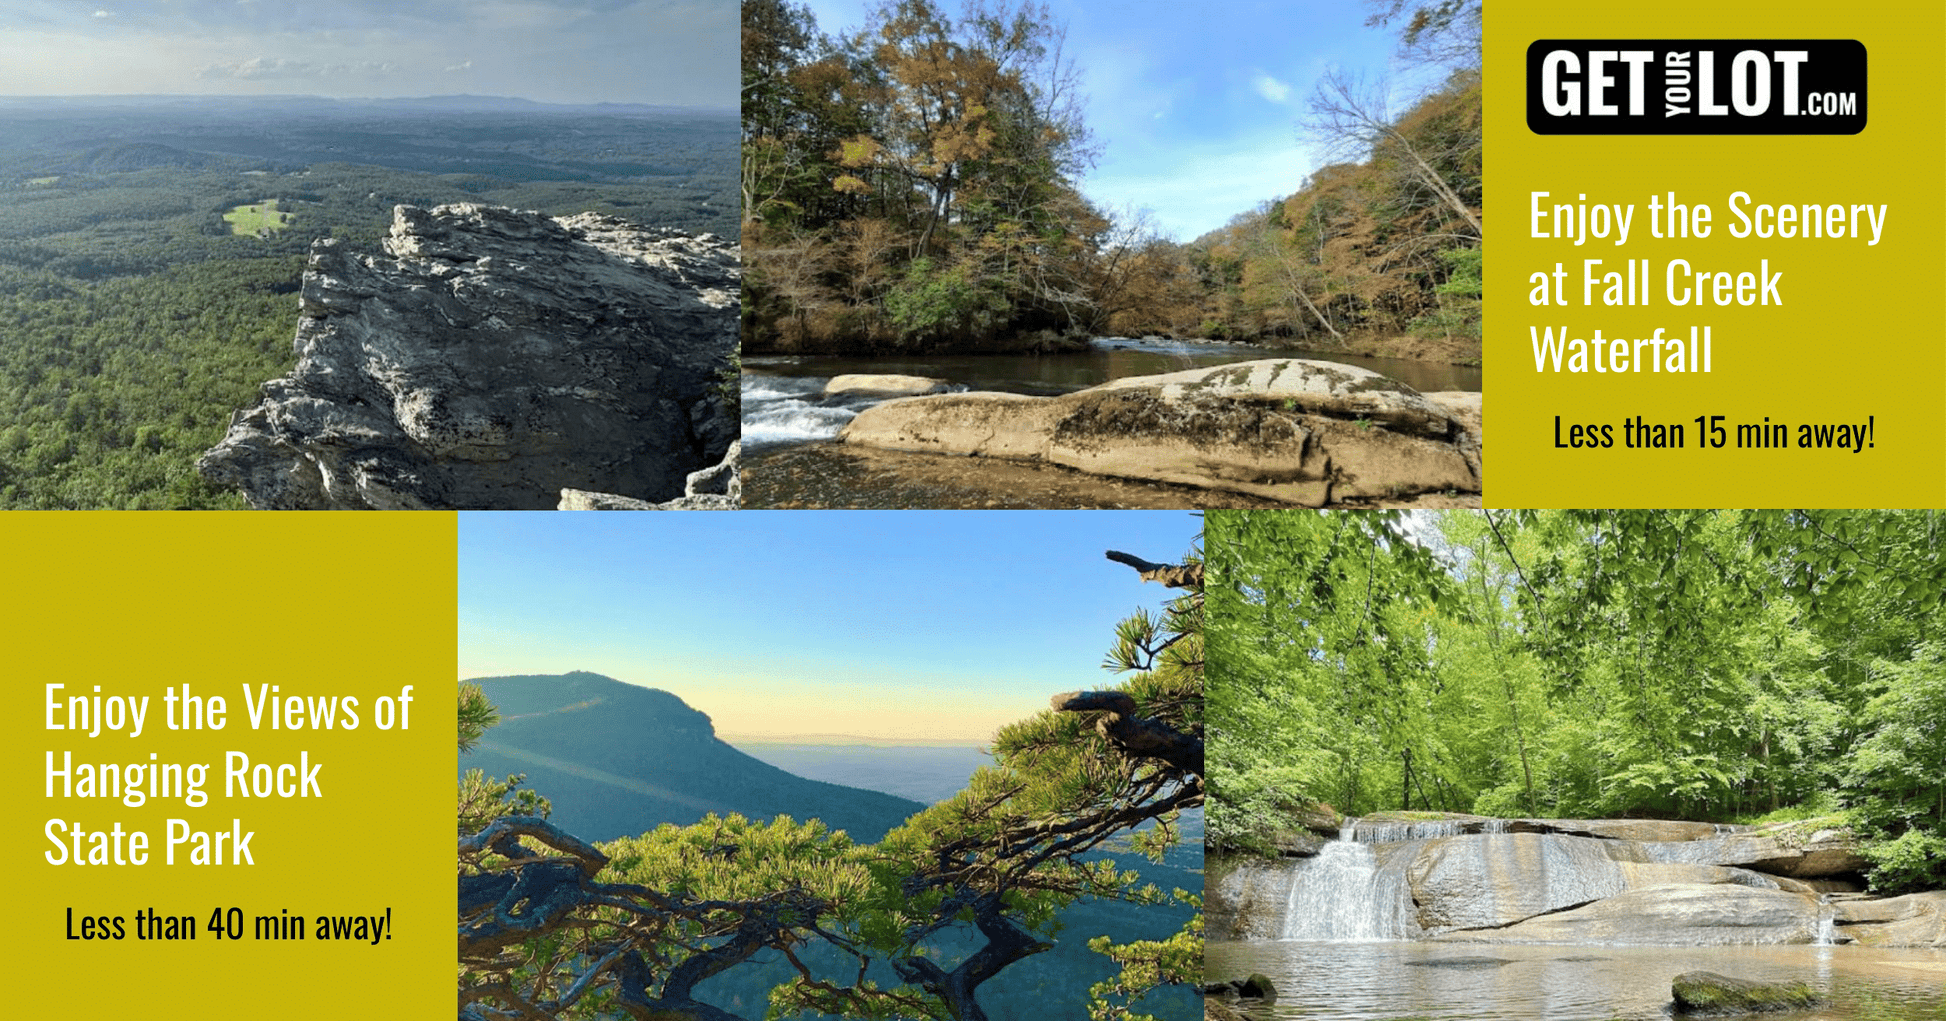 Enjoy the Scenery at Fall Creek Waterfall and Hanging Rock State Park